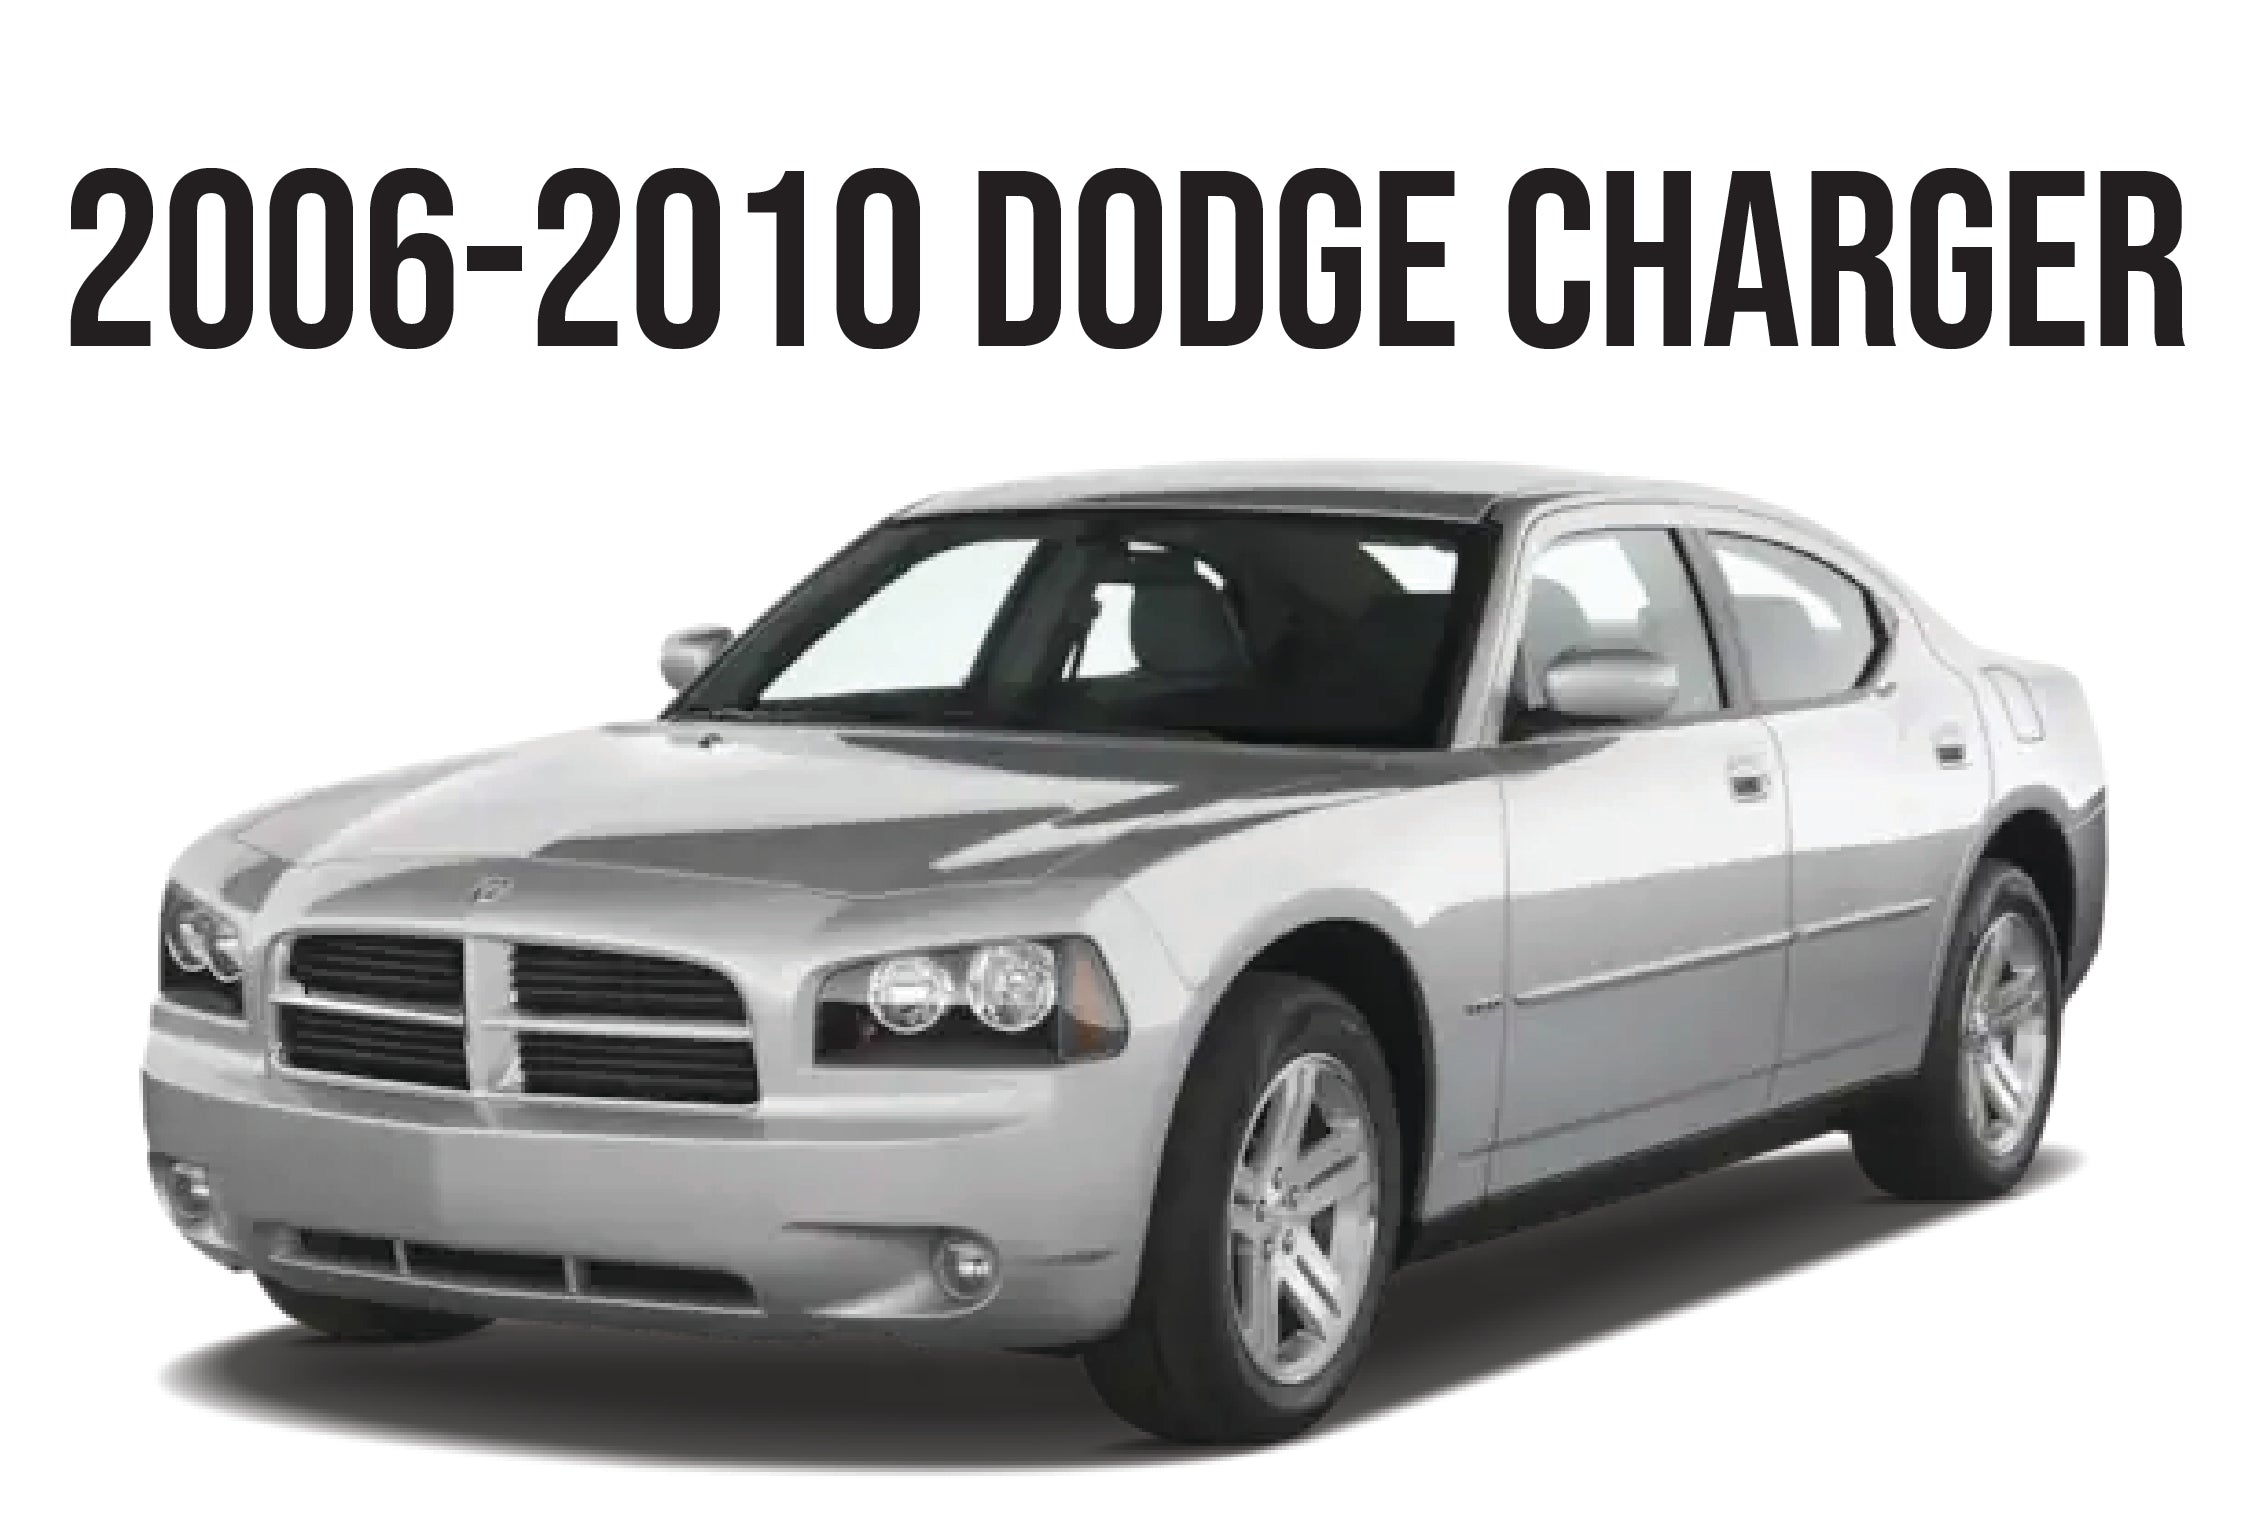 2006-2010 DODGE CHARGER